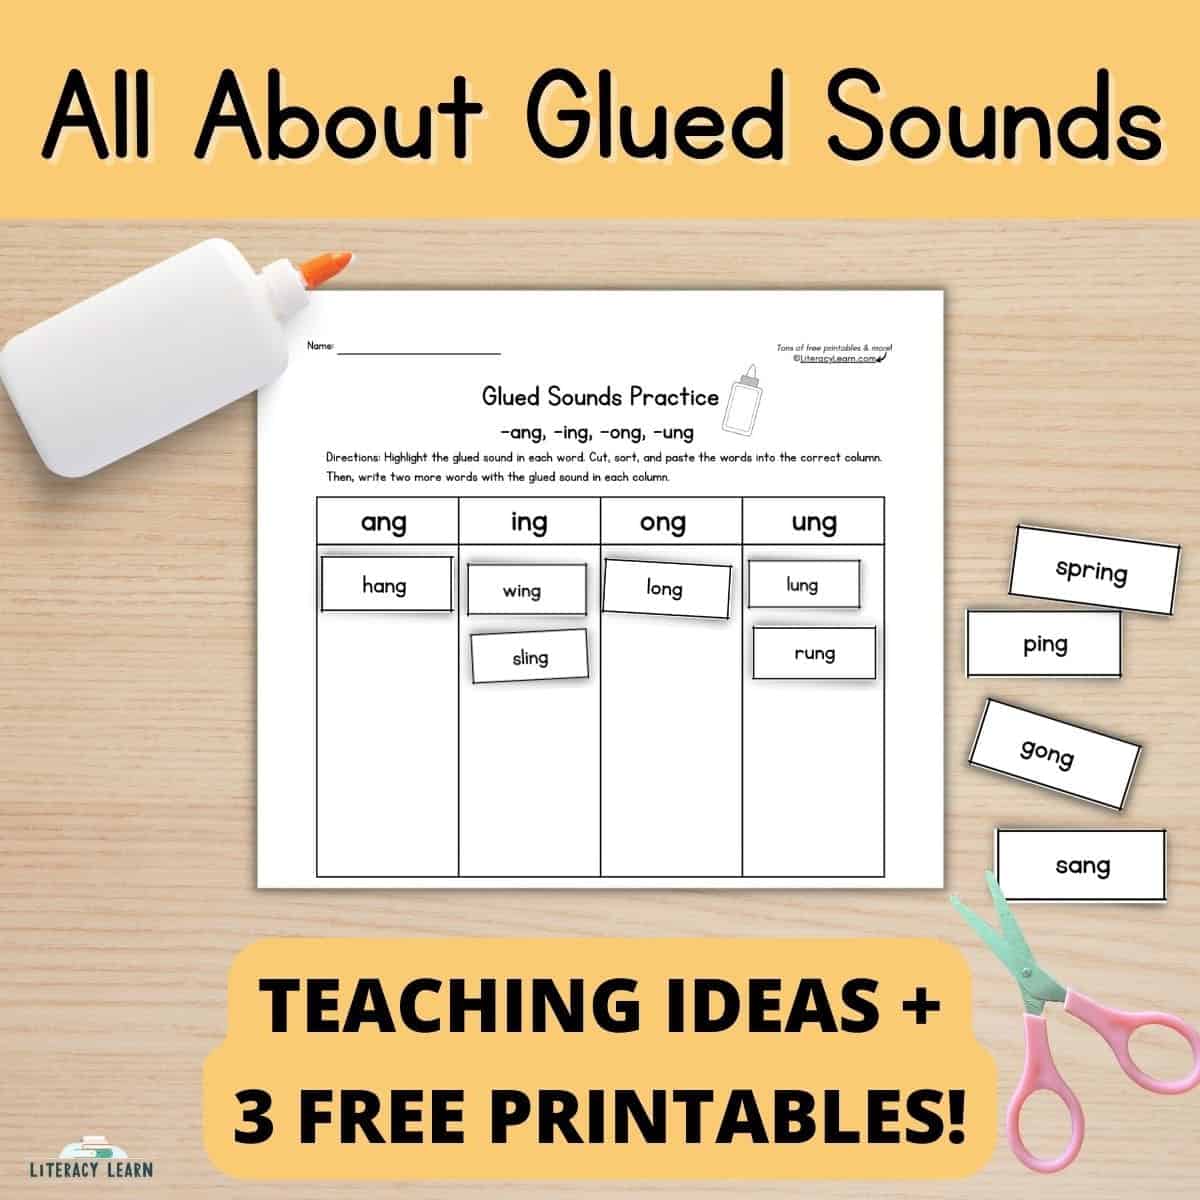 Graphic entitled "All About Glued Sounds" with free worksheet sort with glue and scissors.